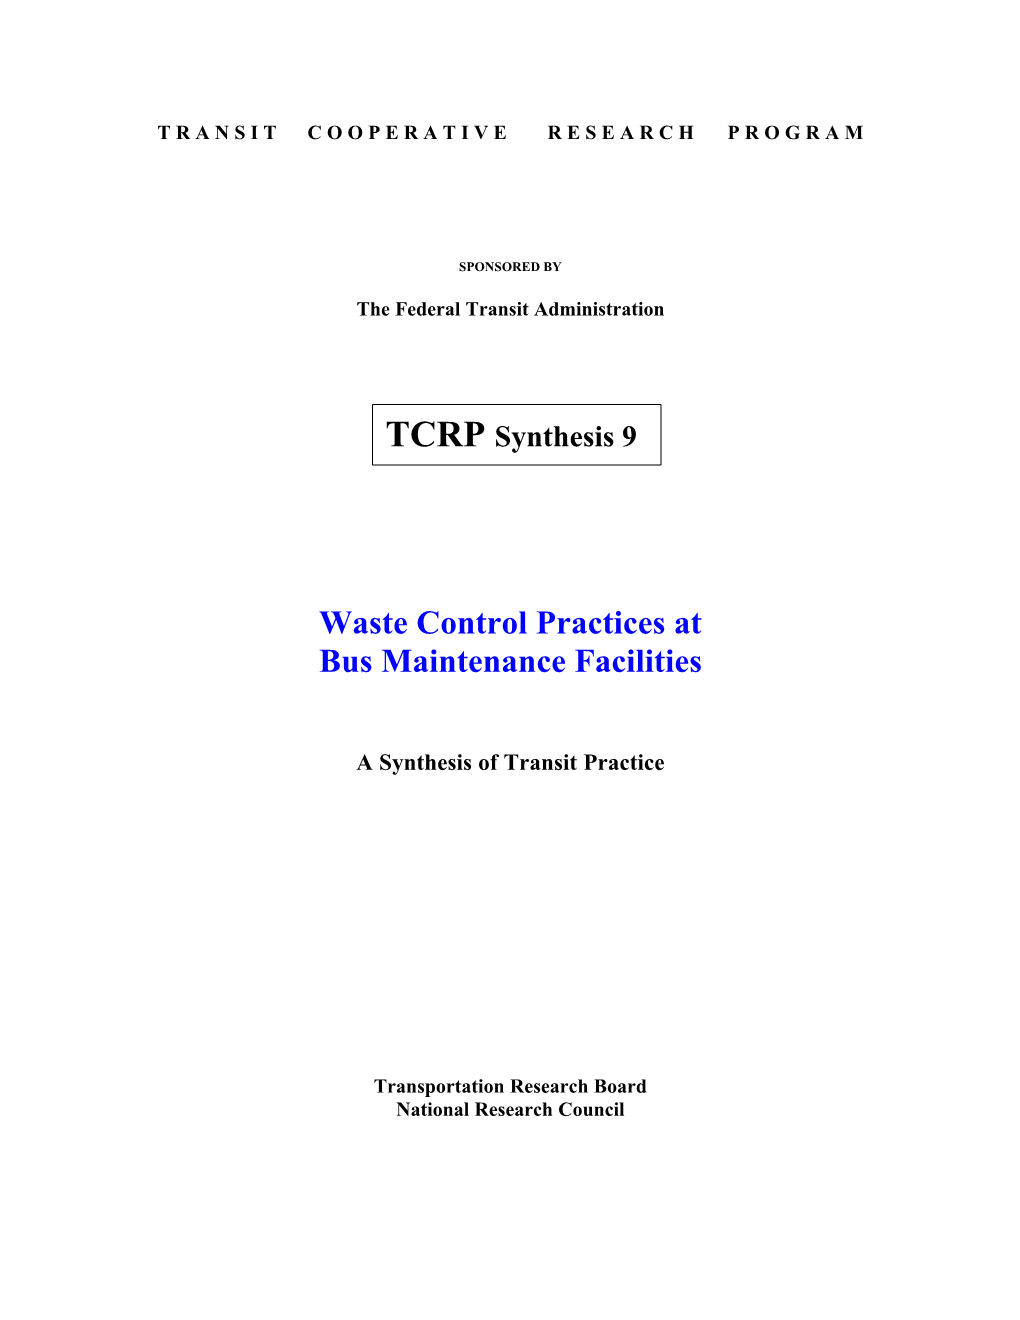 Waste Control Practices at Bus Maintenance Facilities